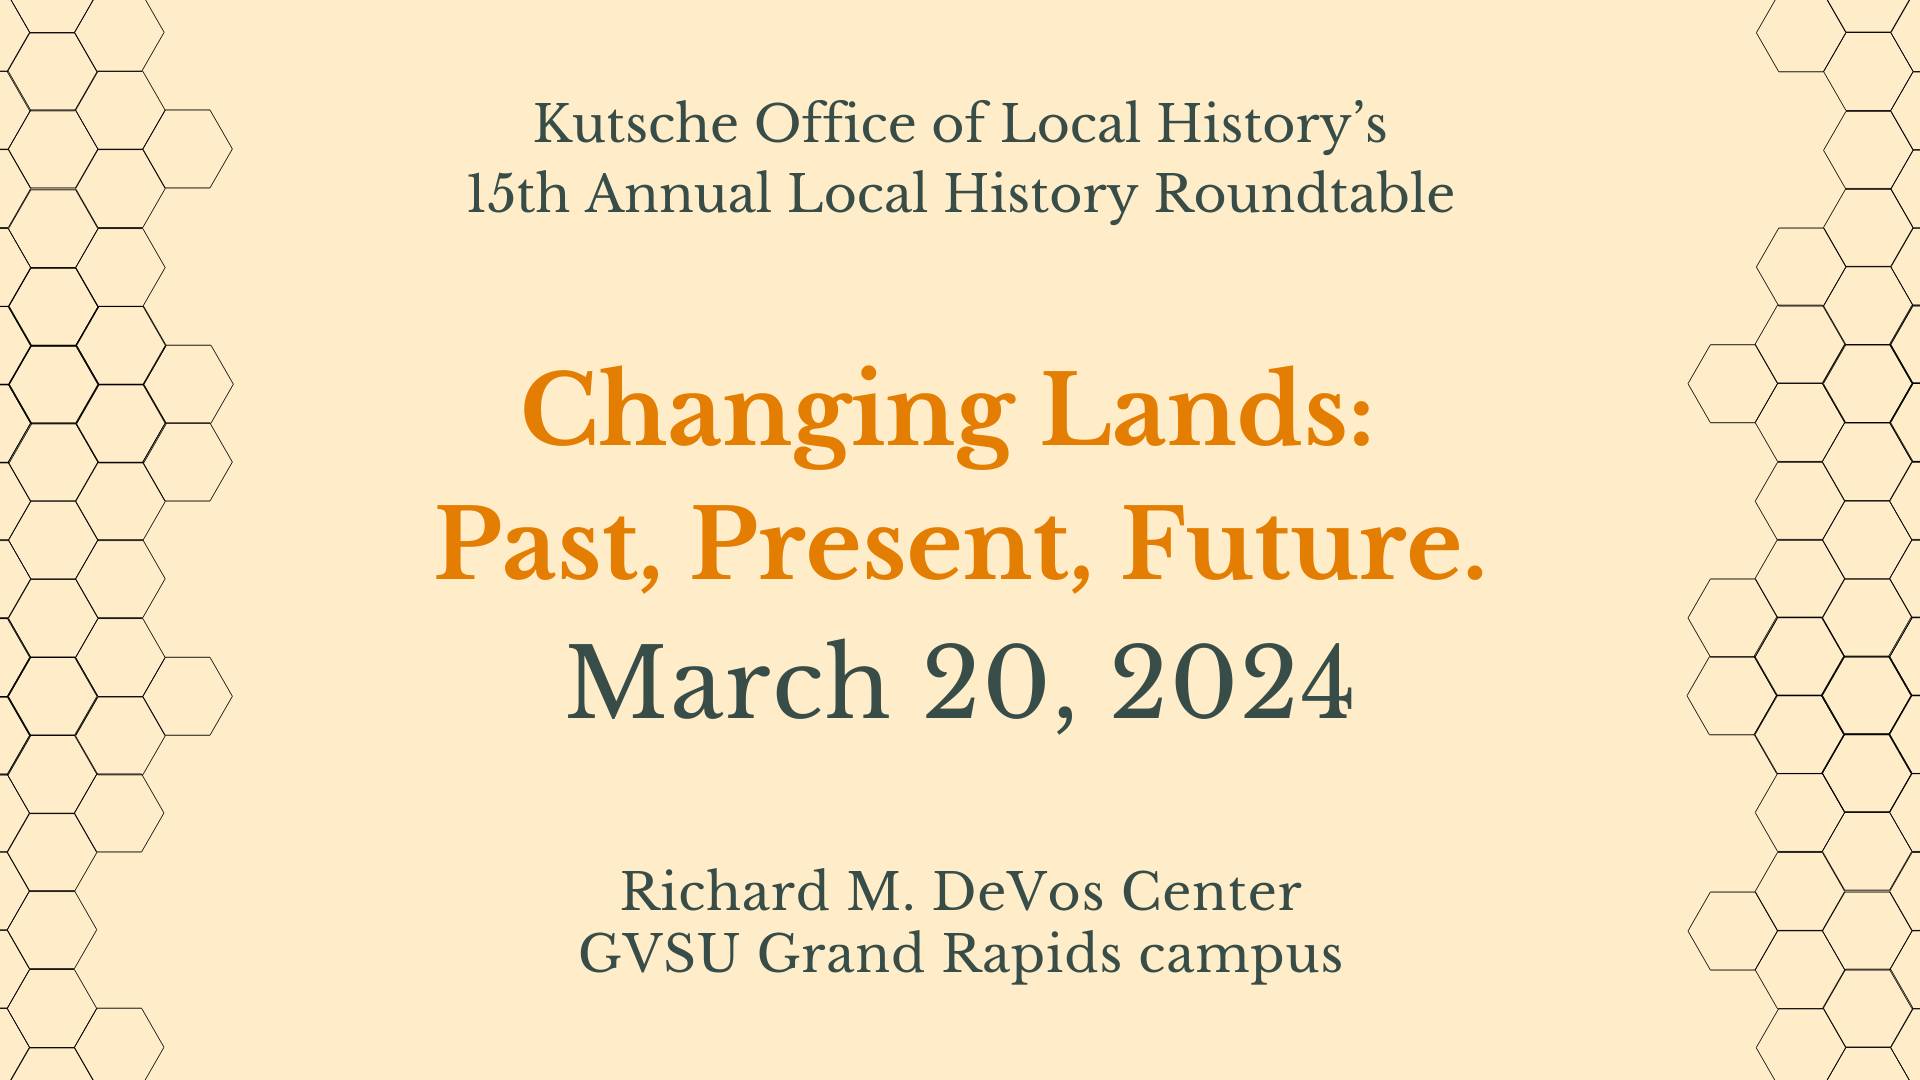 Changing Lands: Past, Present, Future. March 20, 2024, from 1-8 pm.